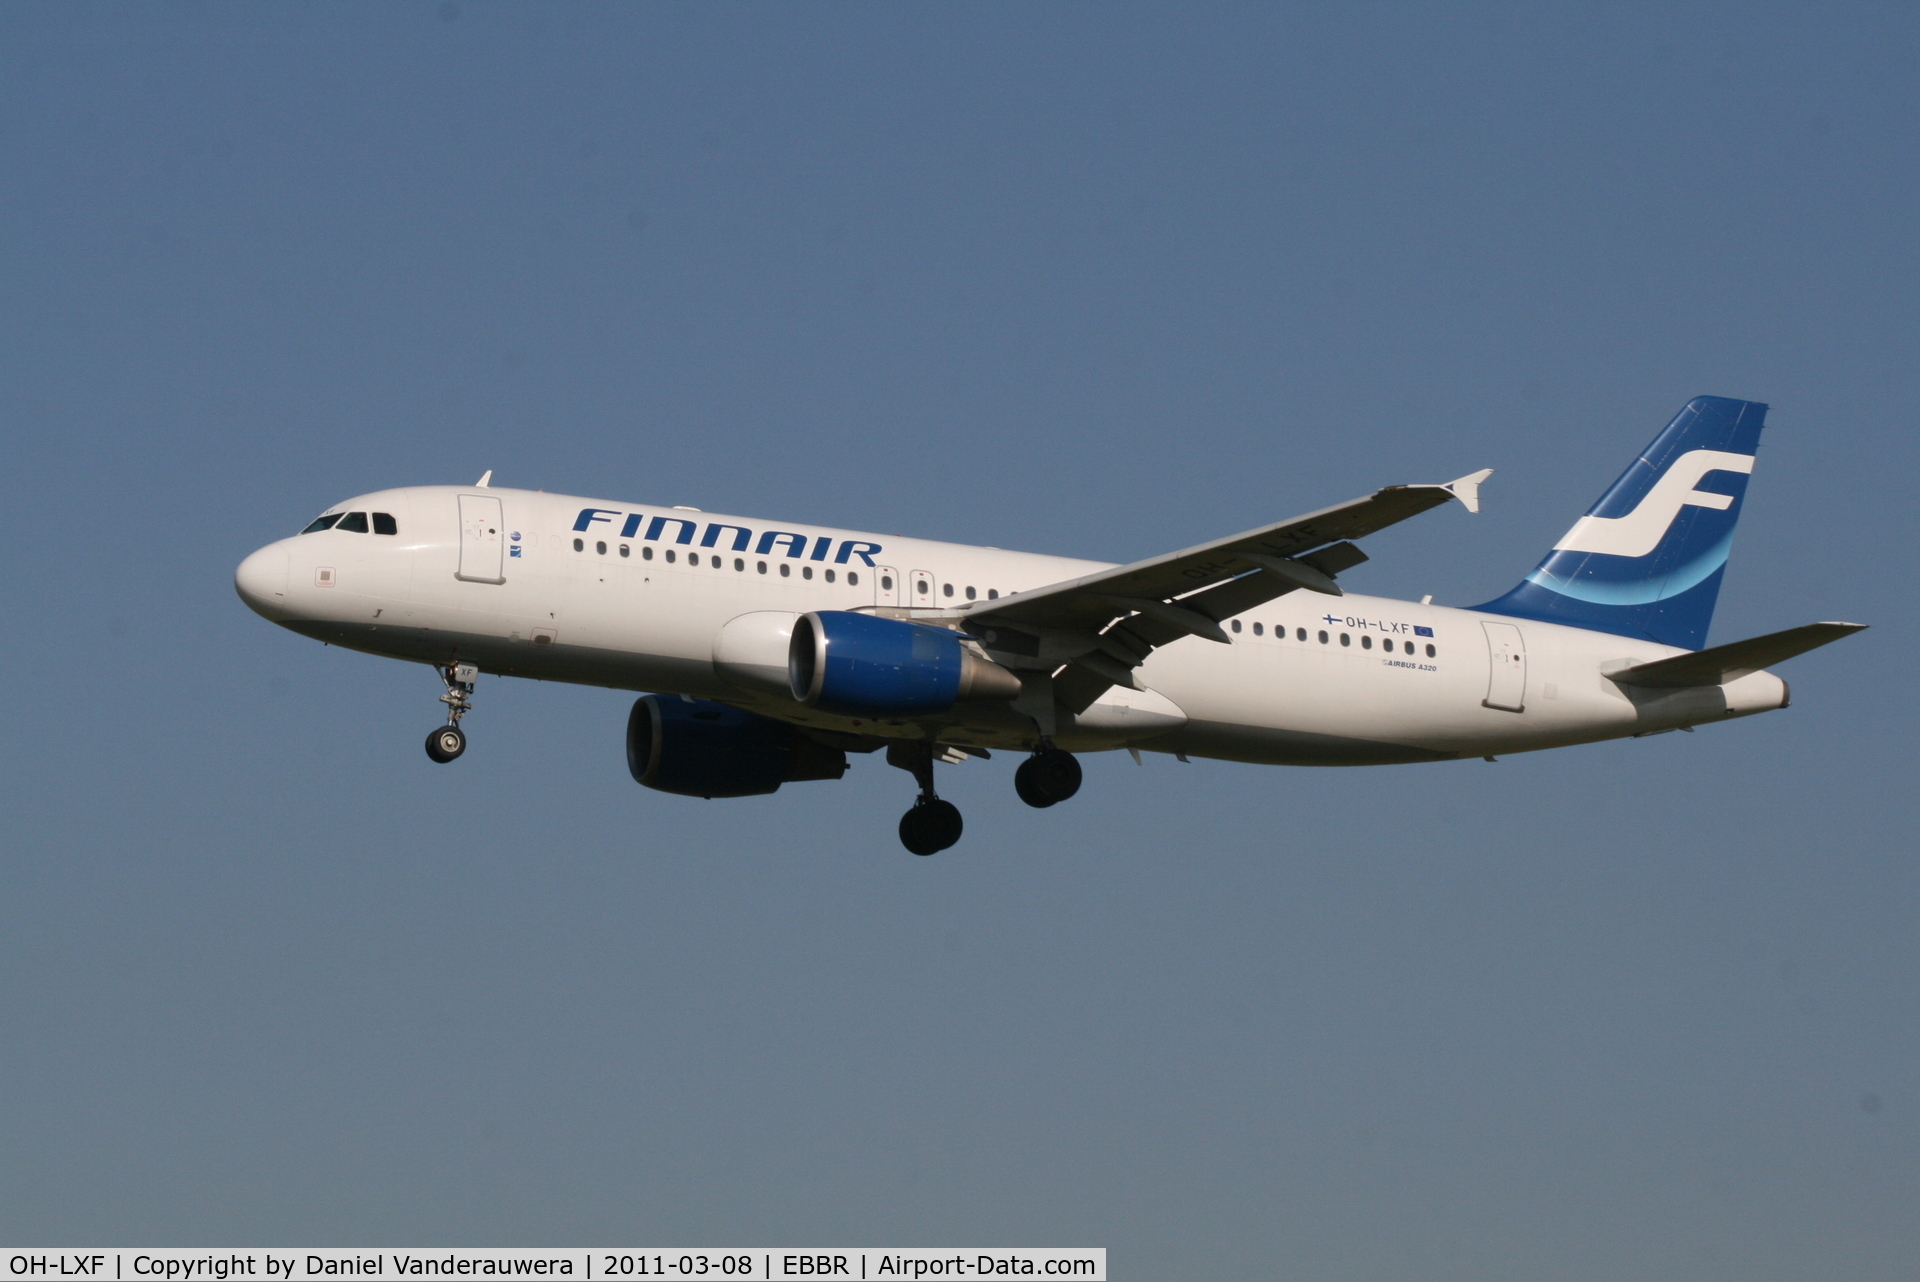 OH-LXF, 2002 Airbus A320-214 C/N 1712, Arrival of flight AY811 to RWY 25L